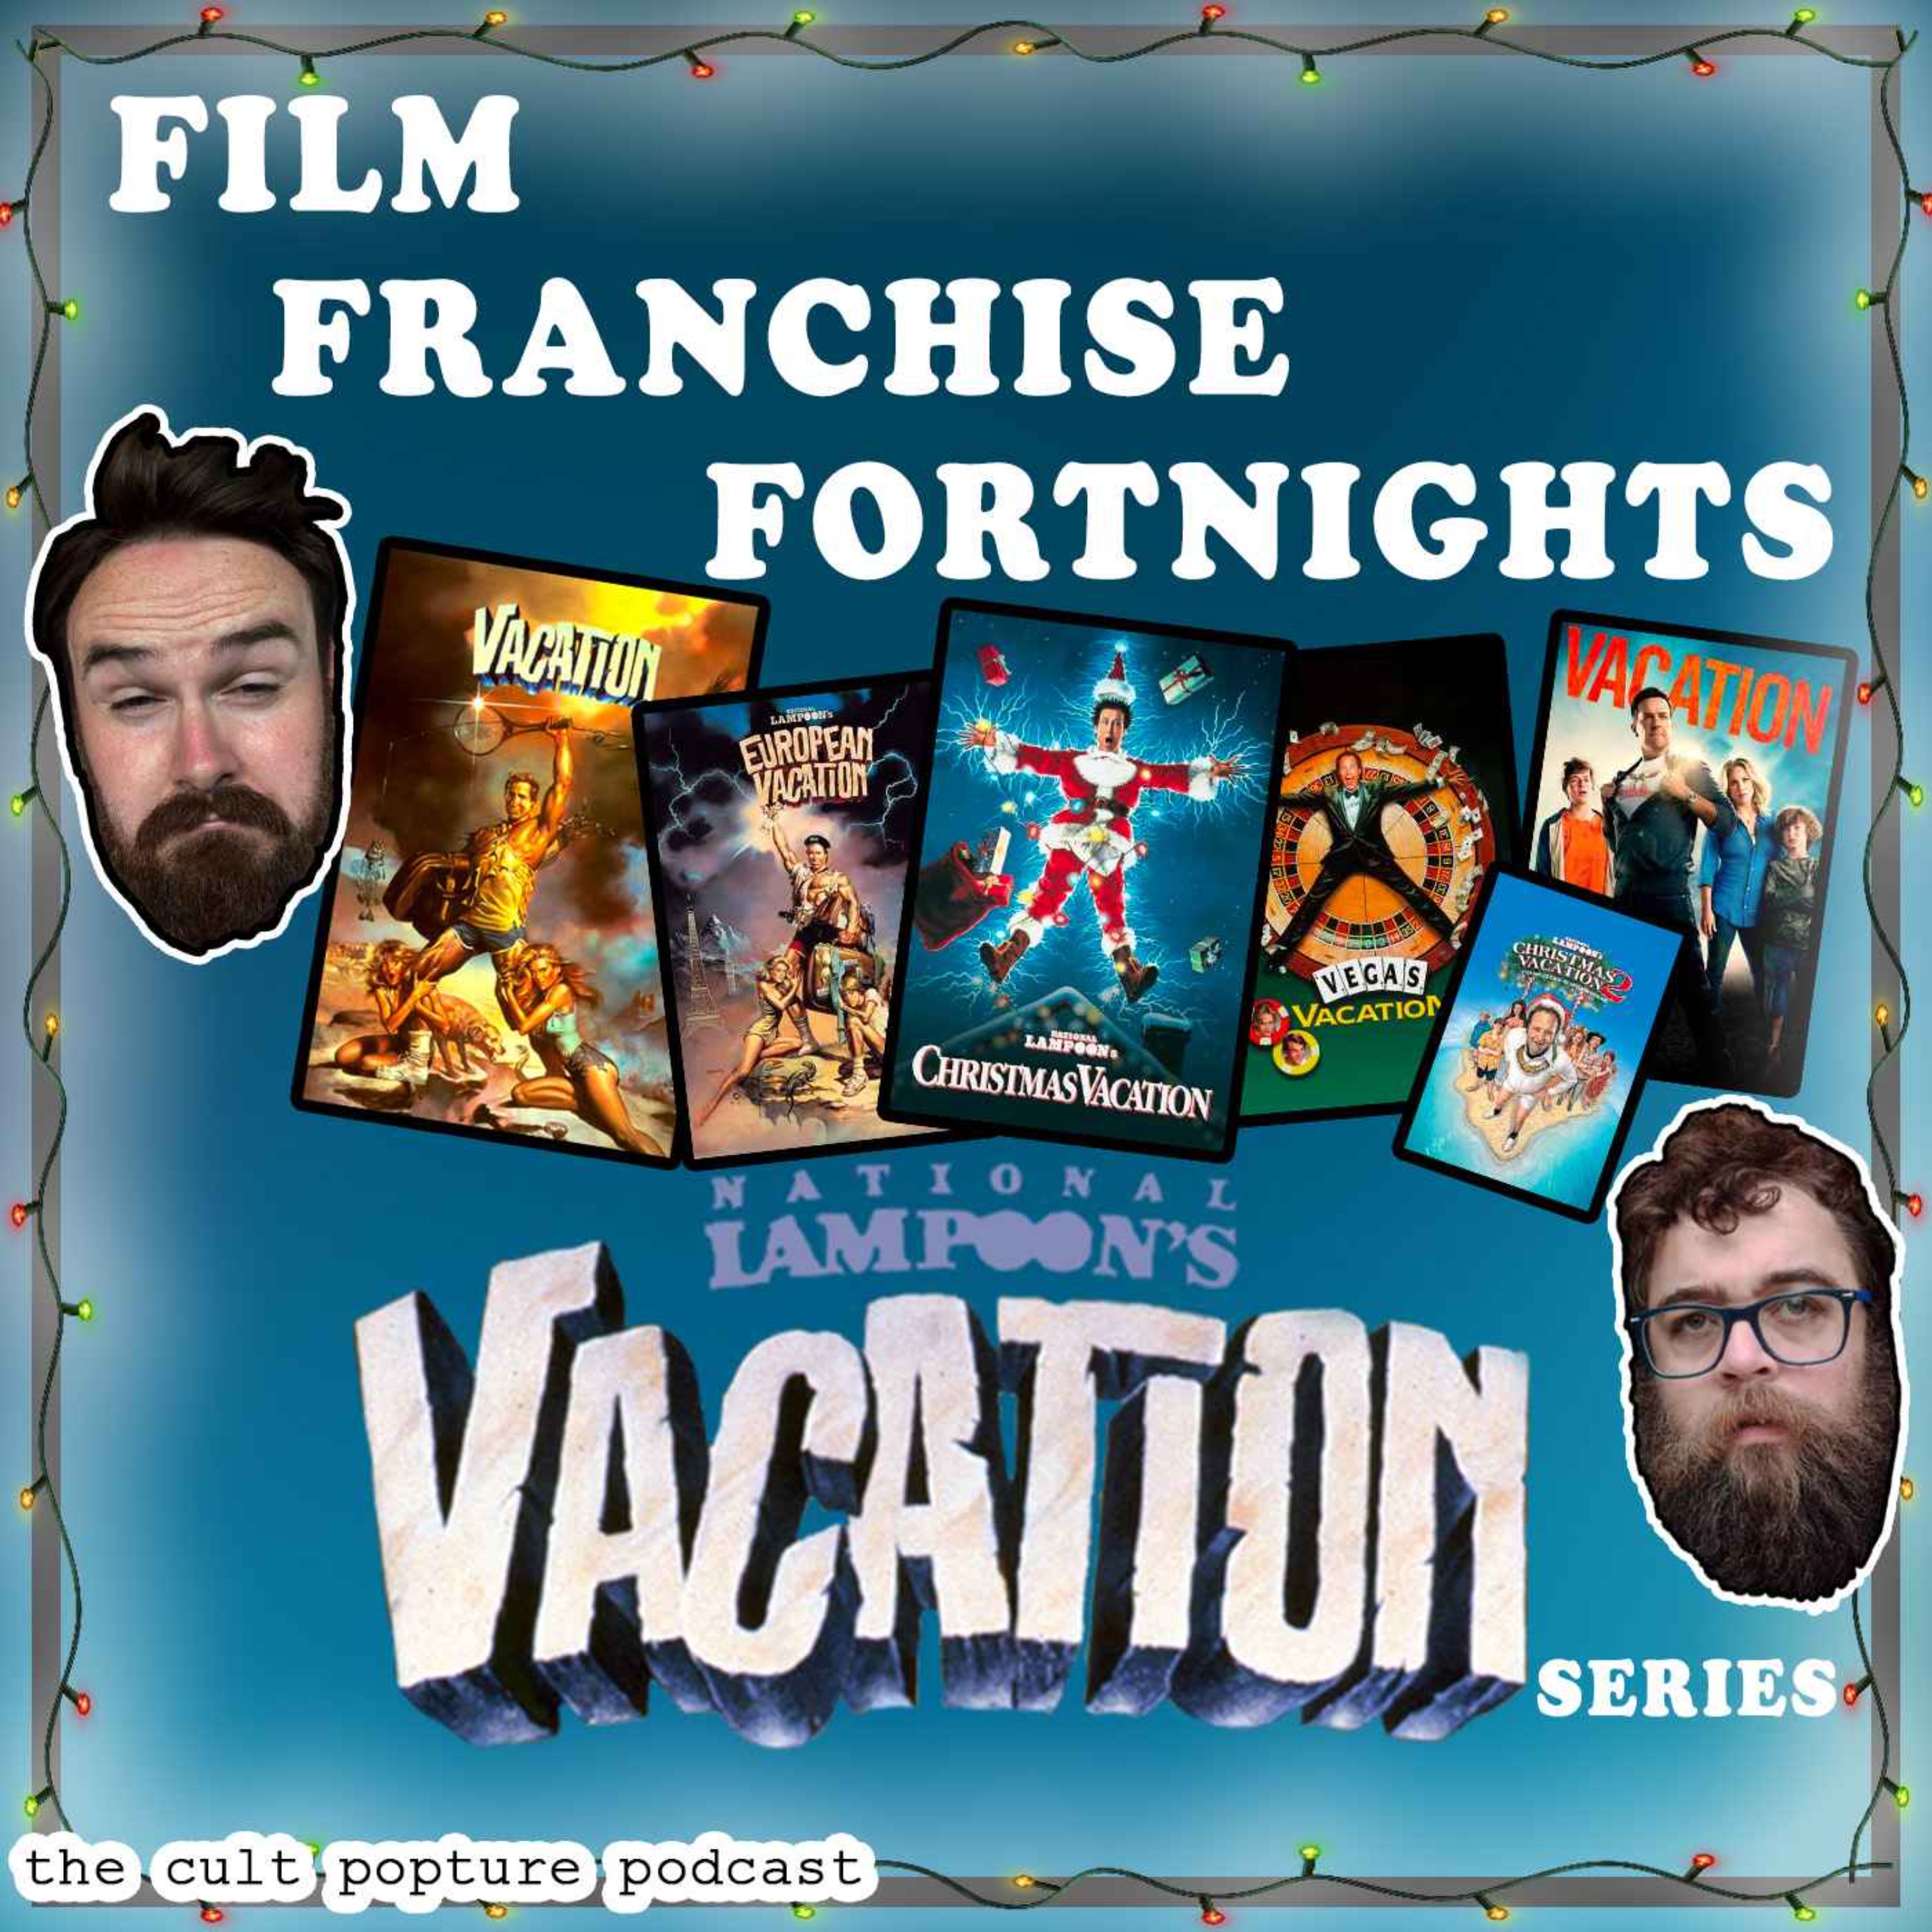 National Lampoon’s ”Vacation” Series | Film Franchise Fortnights